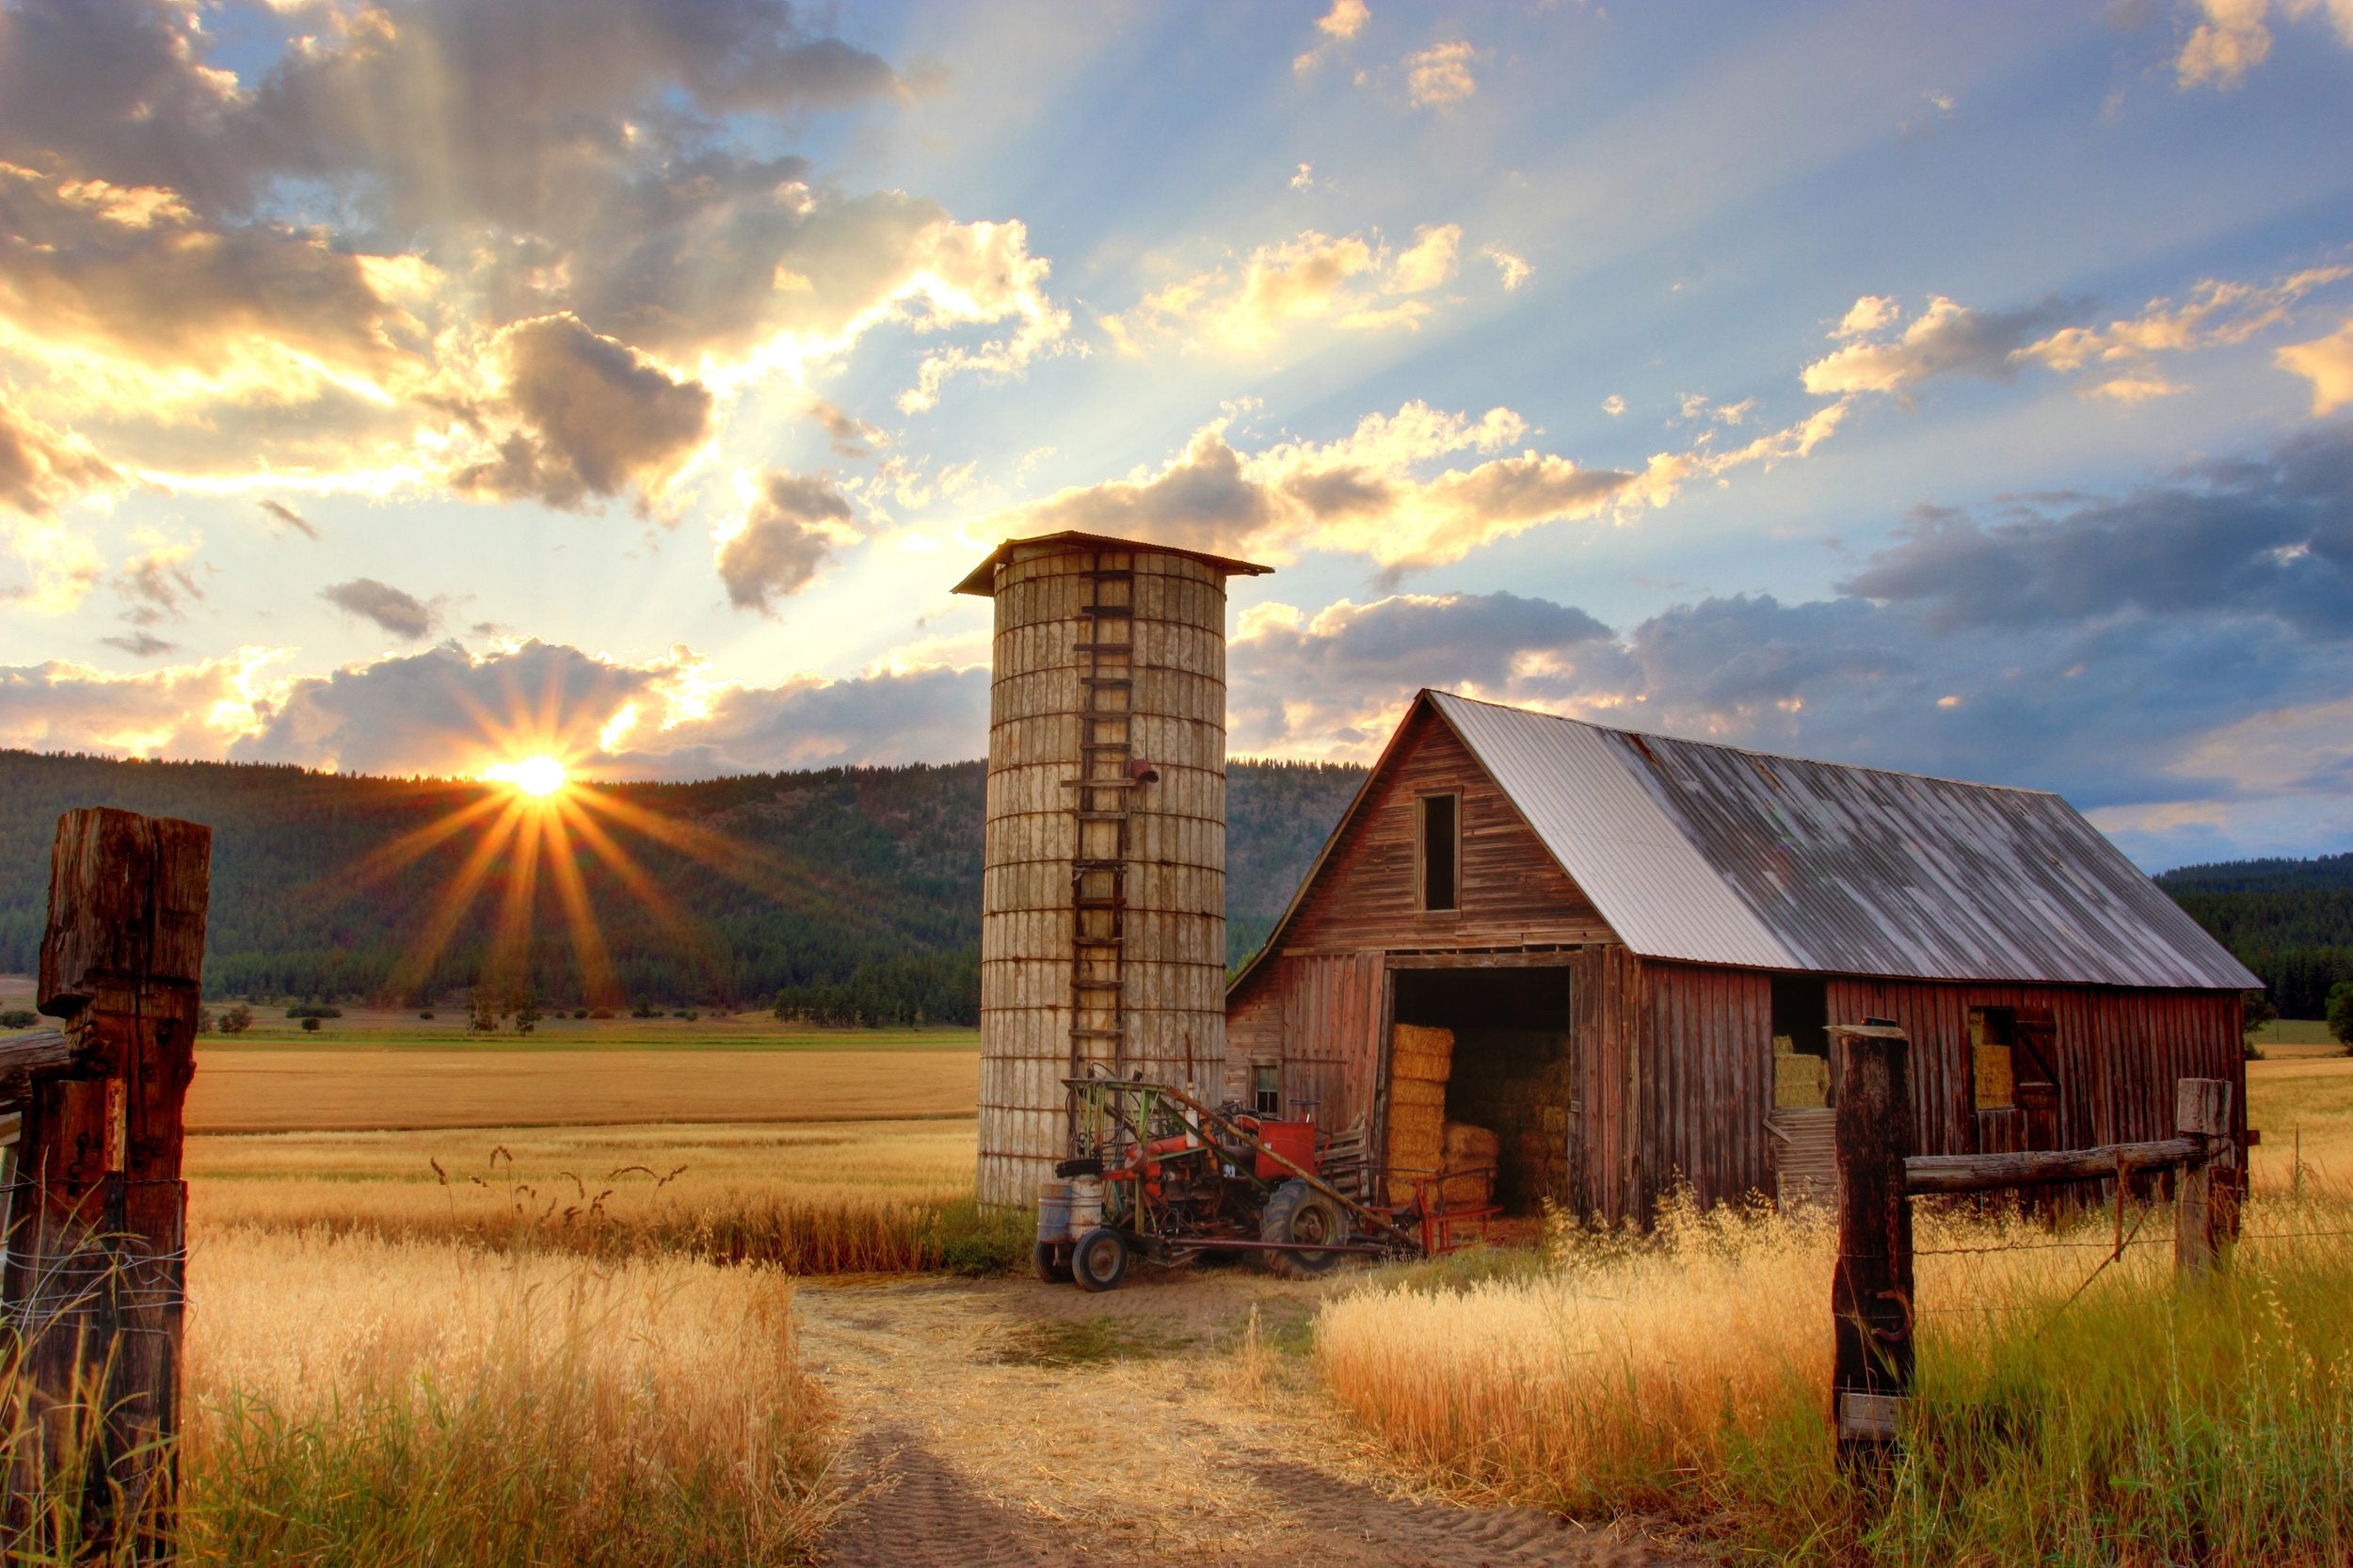 A hay barn in a field with a tractor in front of it. The sun sets over the hills in the backgound.